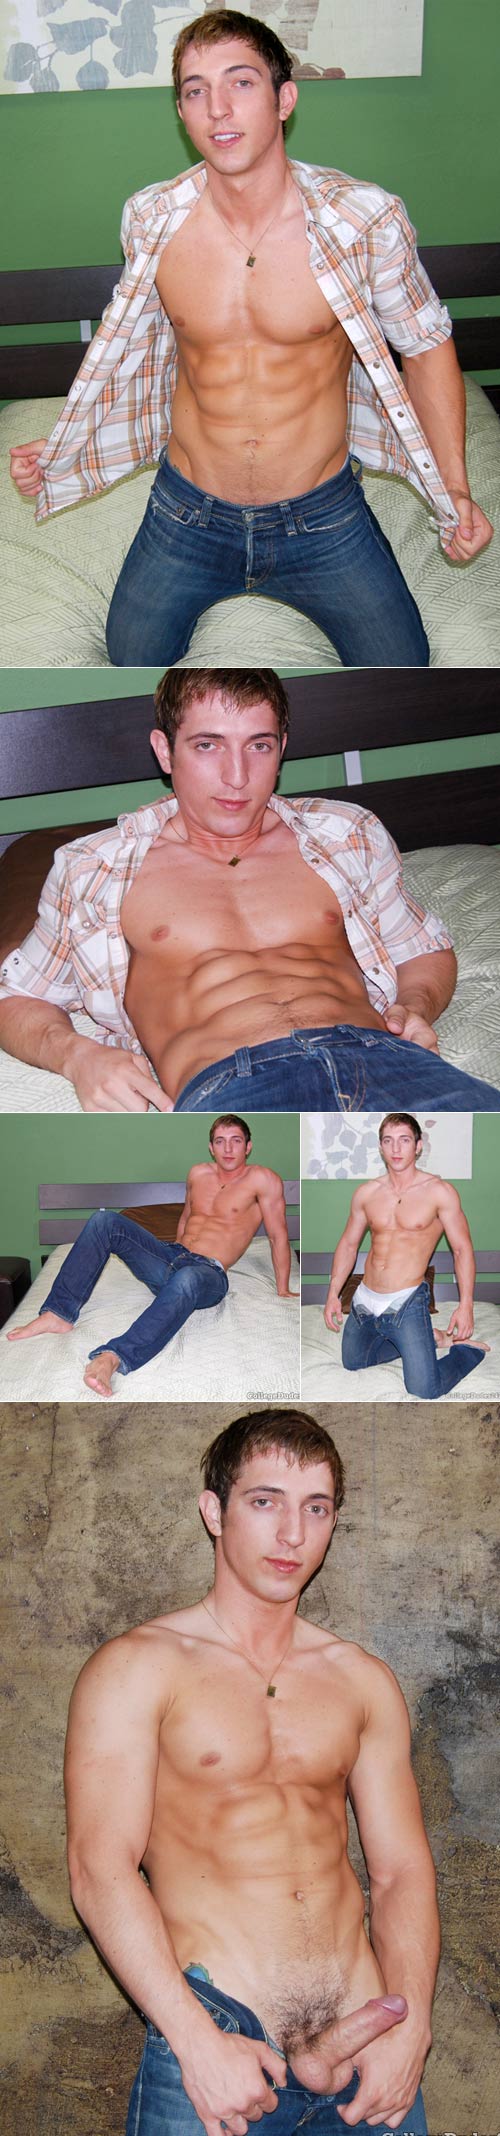 Jimmy Durano at CollegeDudes247